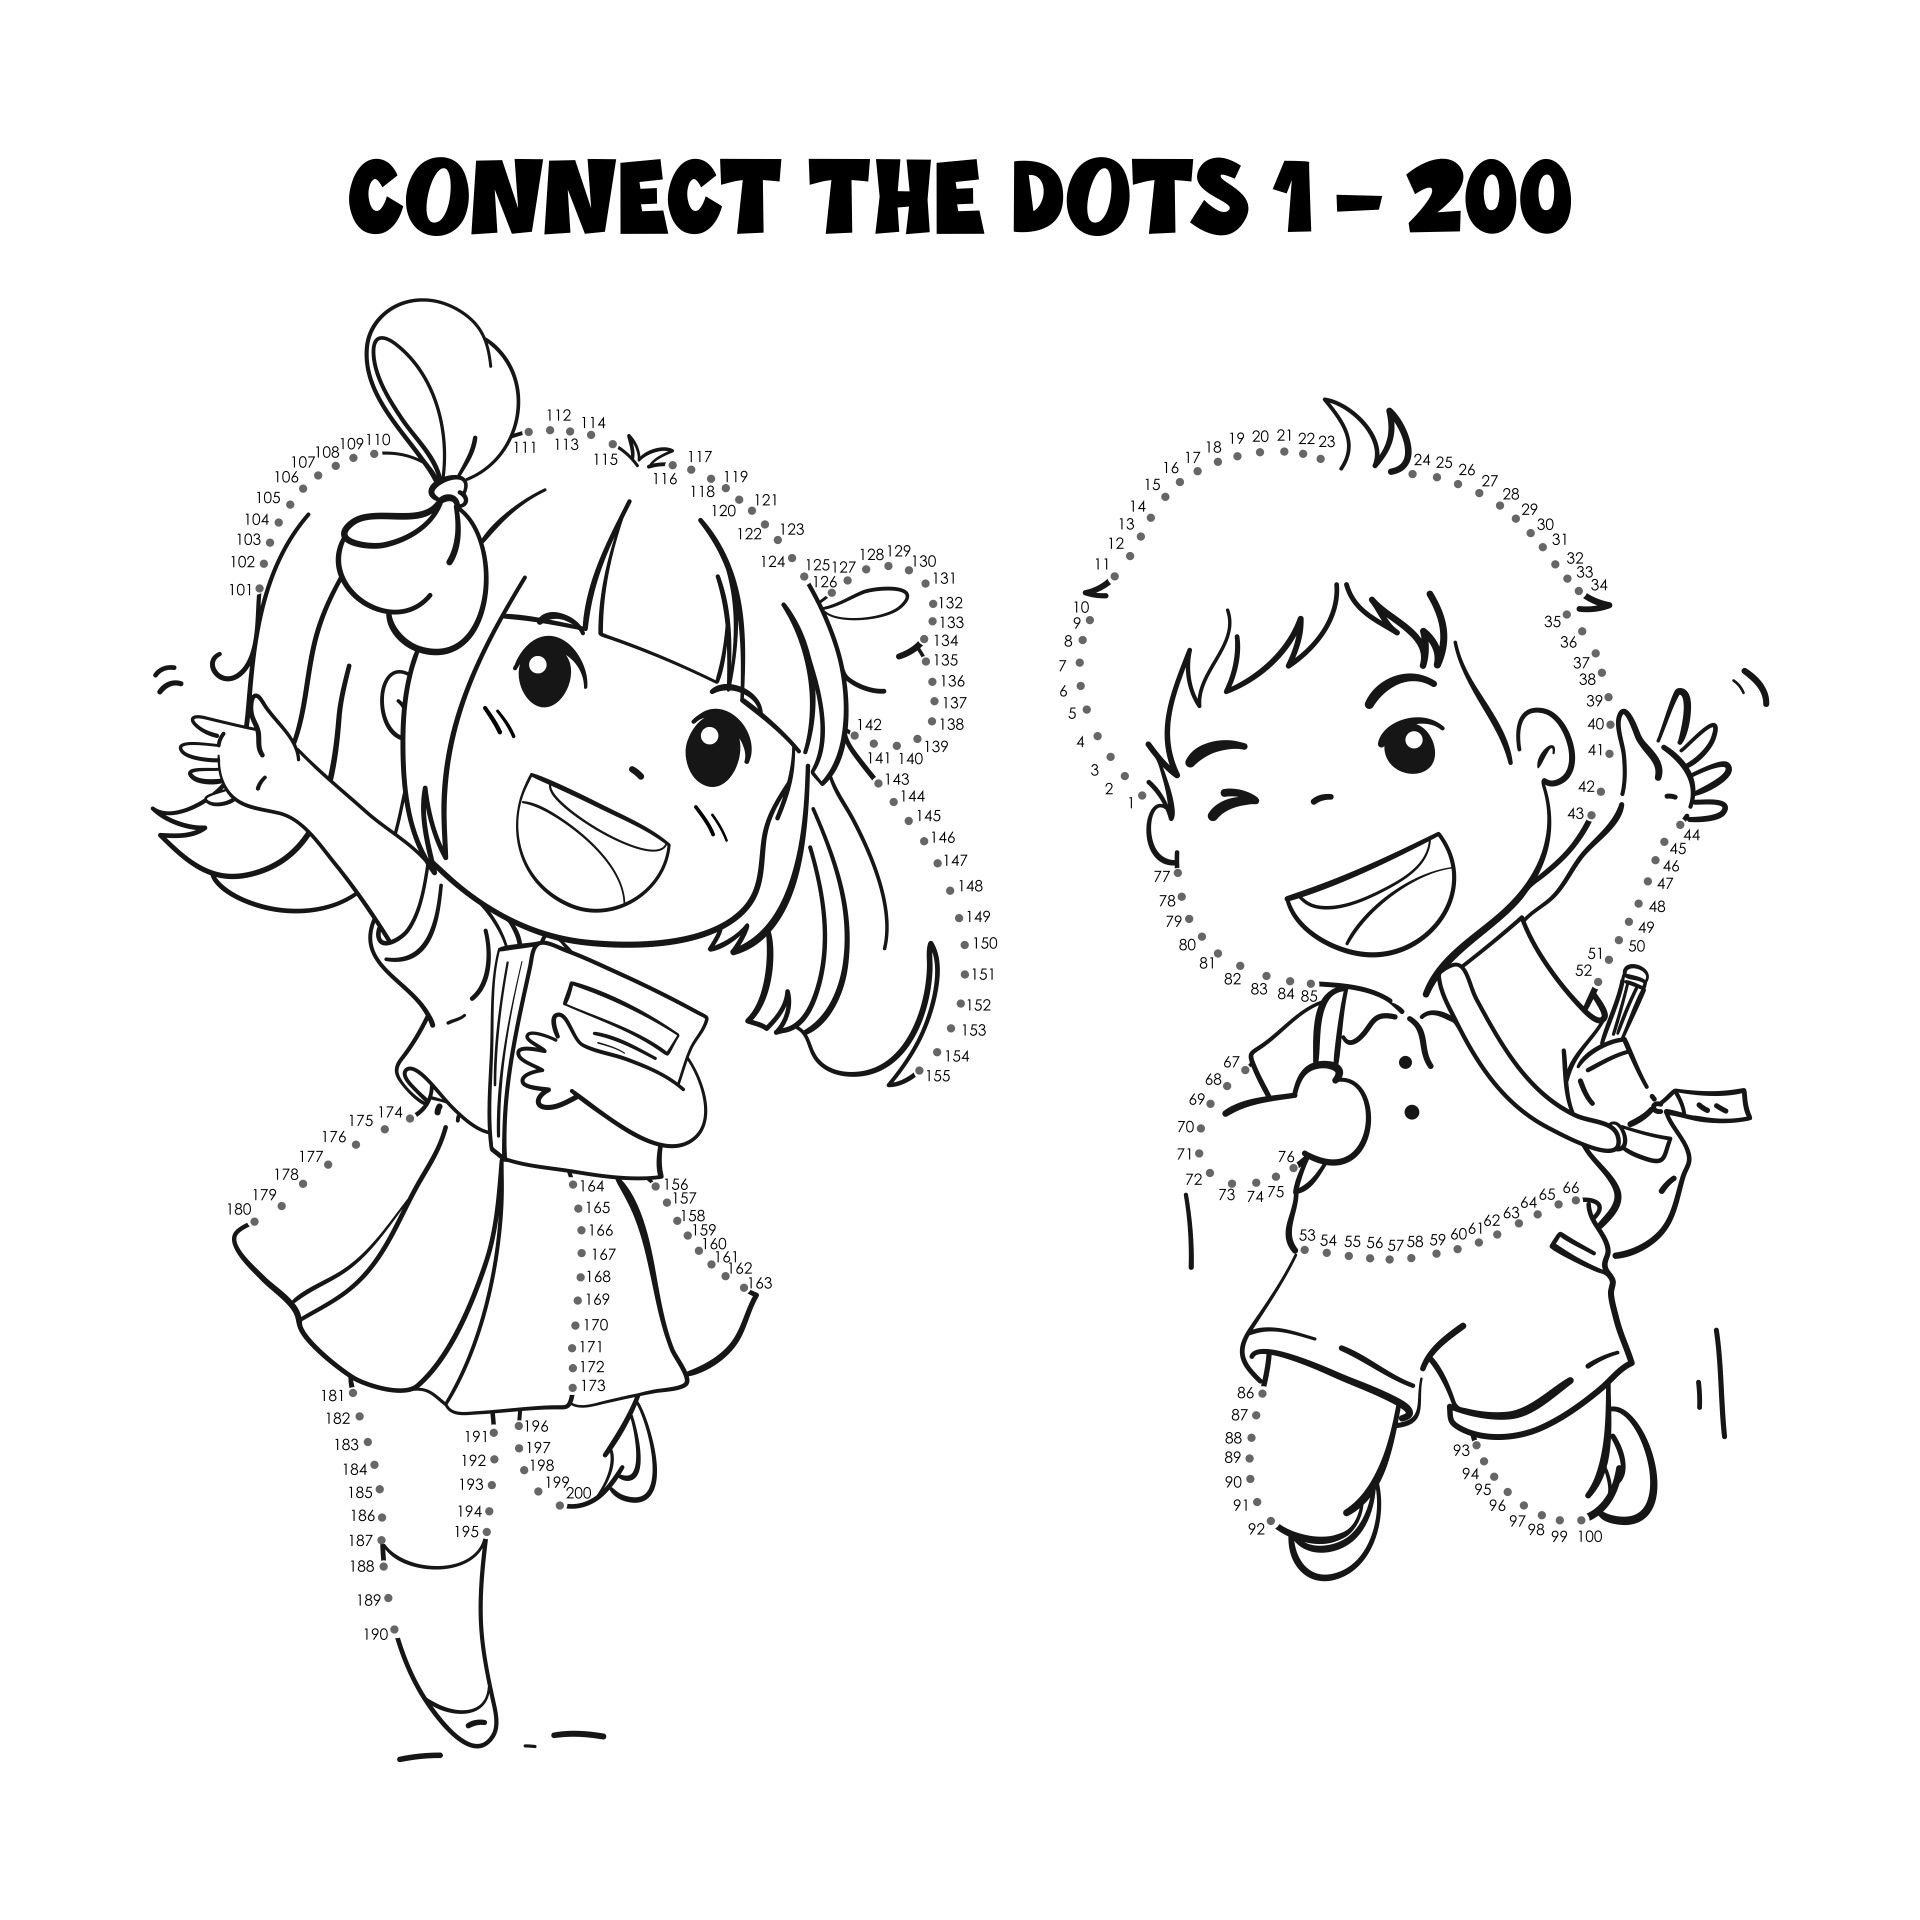 6 Best Images of Printable Connect The Dots To 200 - Hard Connect the